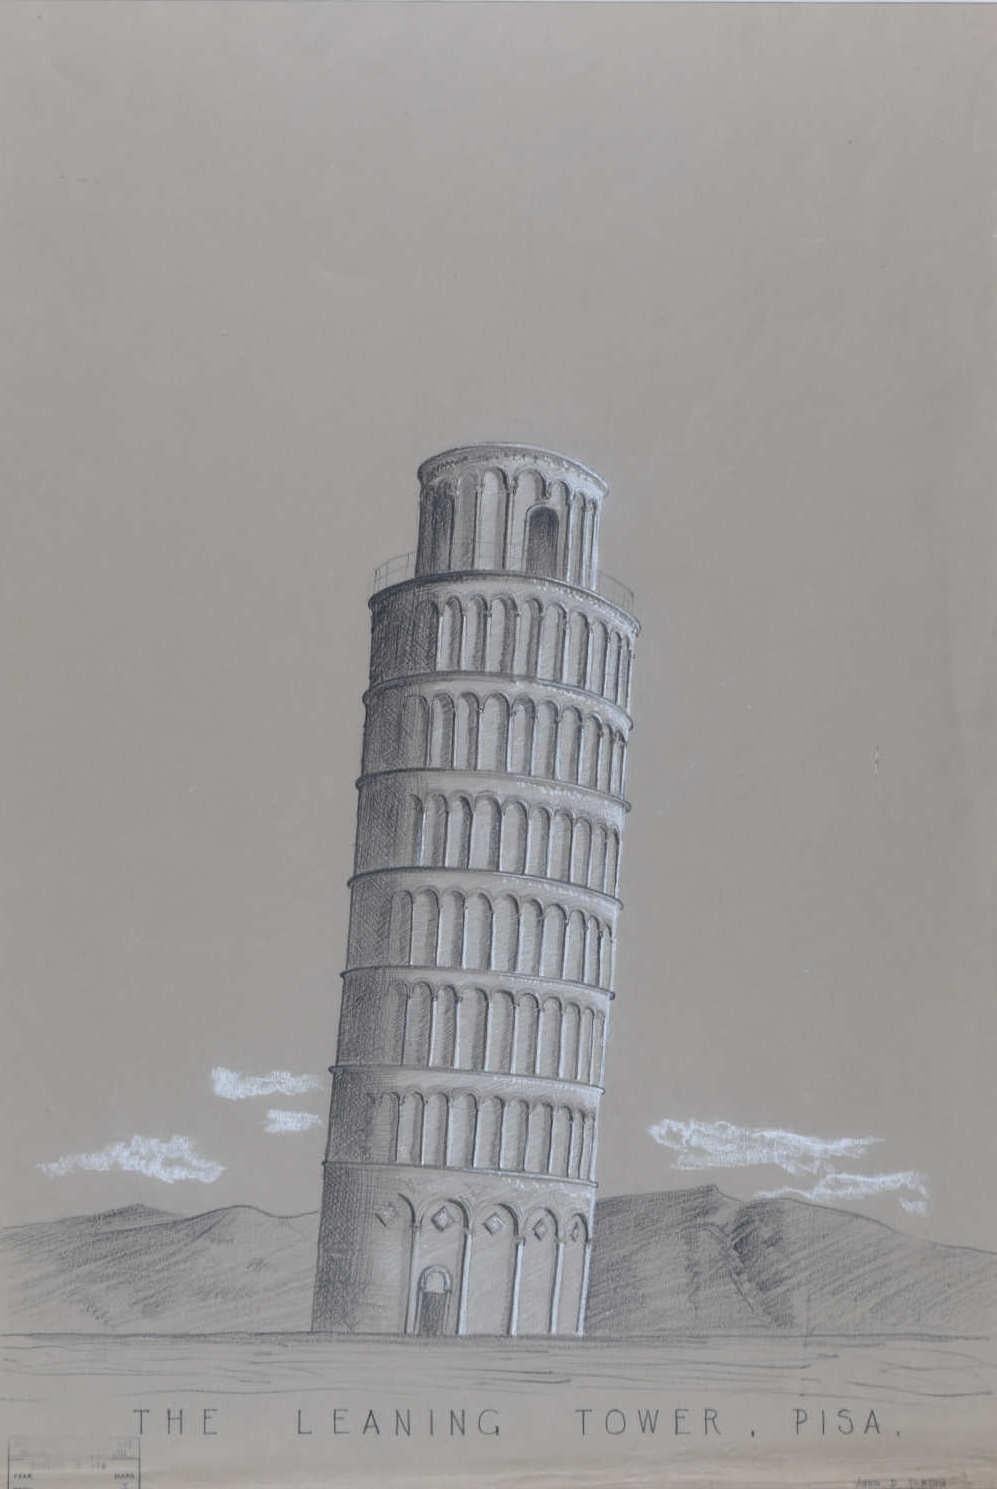 John D Paxton Landscape Art - Leaning Tower of Pisa, Italy architectural drawing by John Paxton